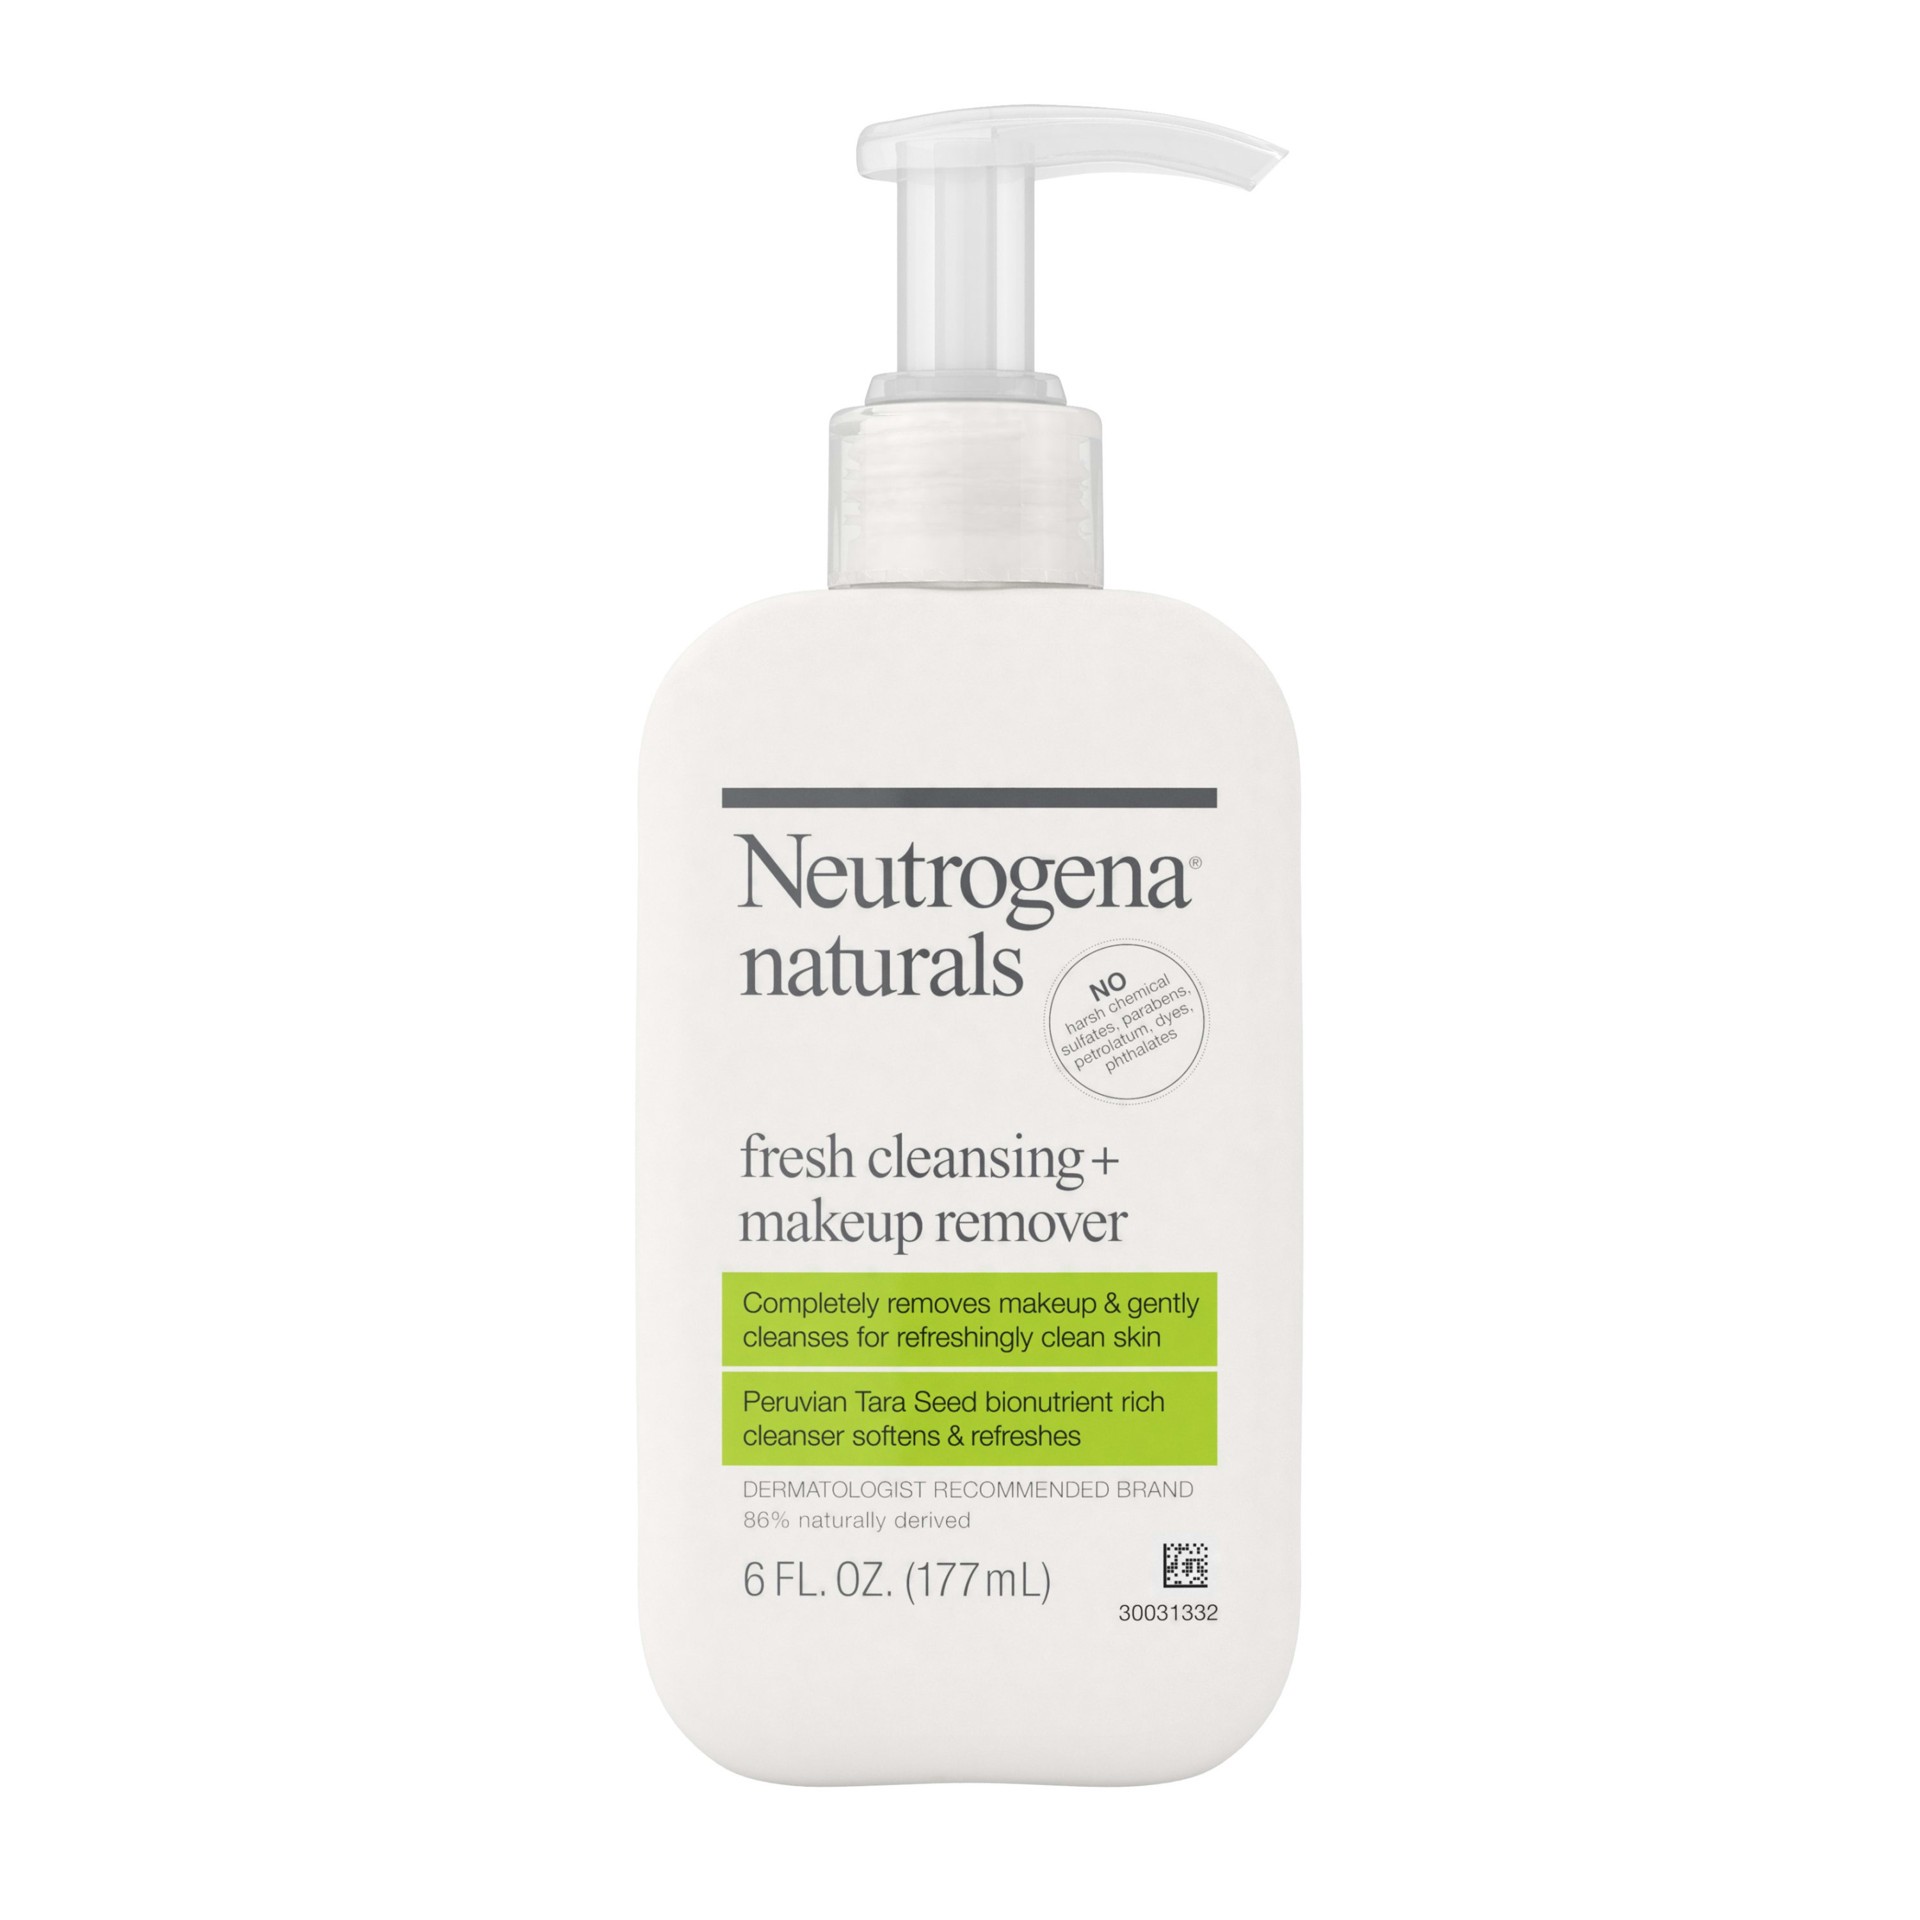 slide 5 of 5, Neutrogena Naturals Fresh Cleansing Daily Face Wash + Makeup Remover with Naturally-Derived Peruvian Tara Seed, Hypoallergenic, Non-Comedogenic & Sulfate-, Paraben- & Phthalate-Free, 6 fl. oz, 6 fl oz